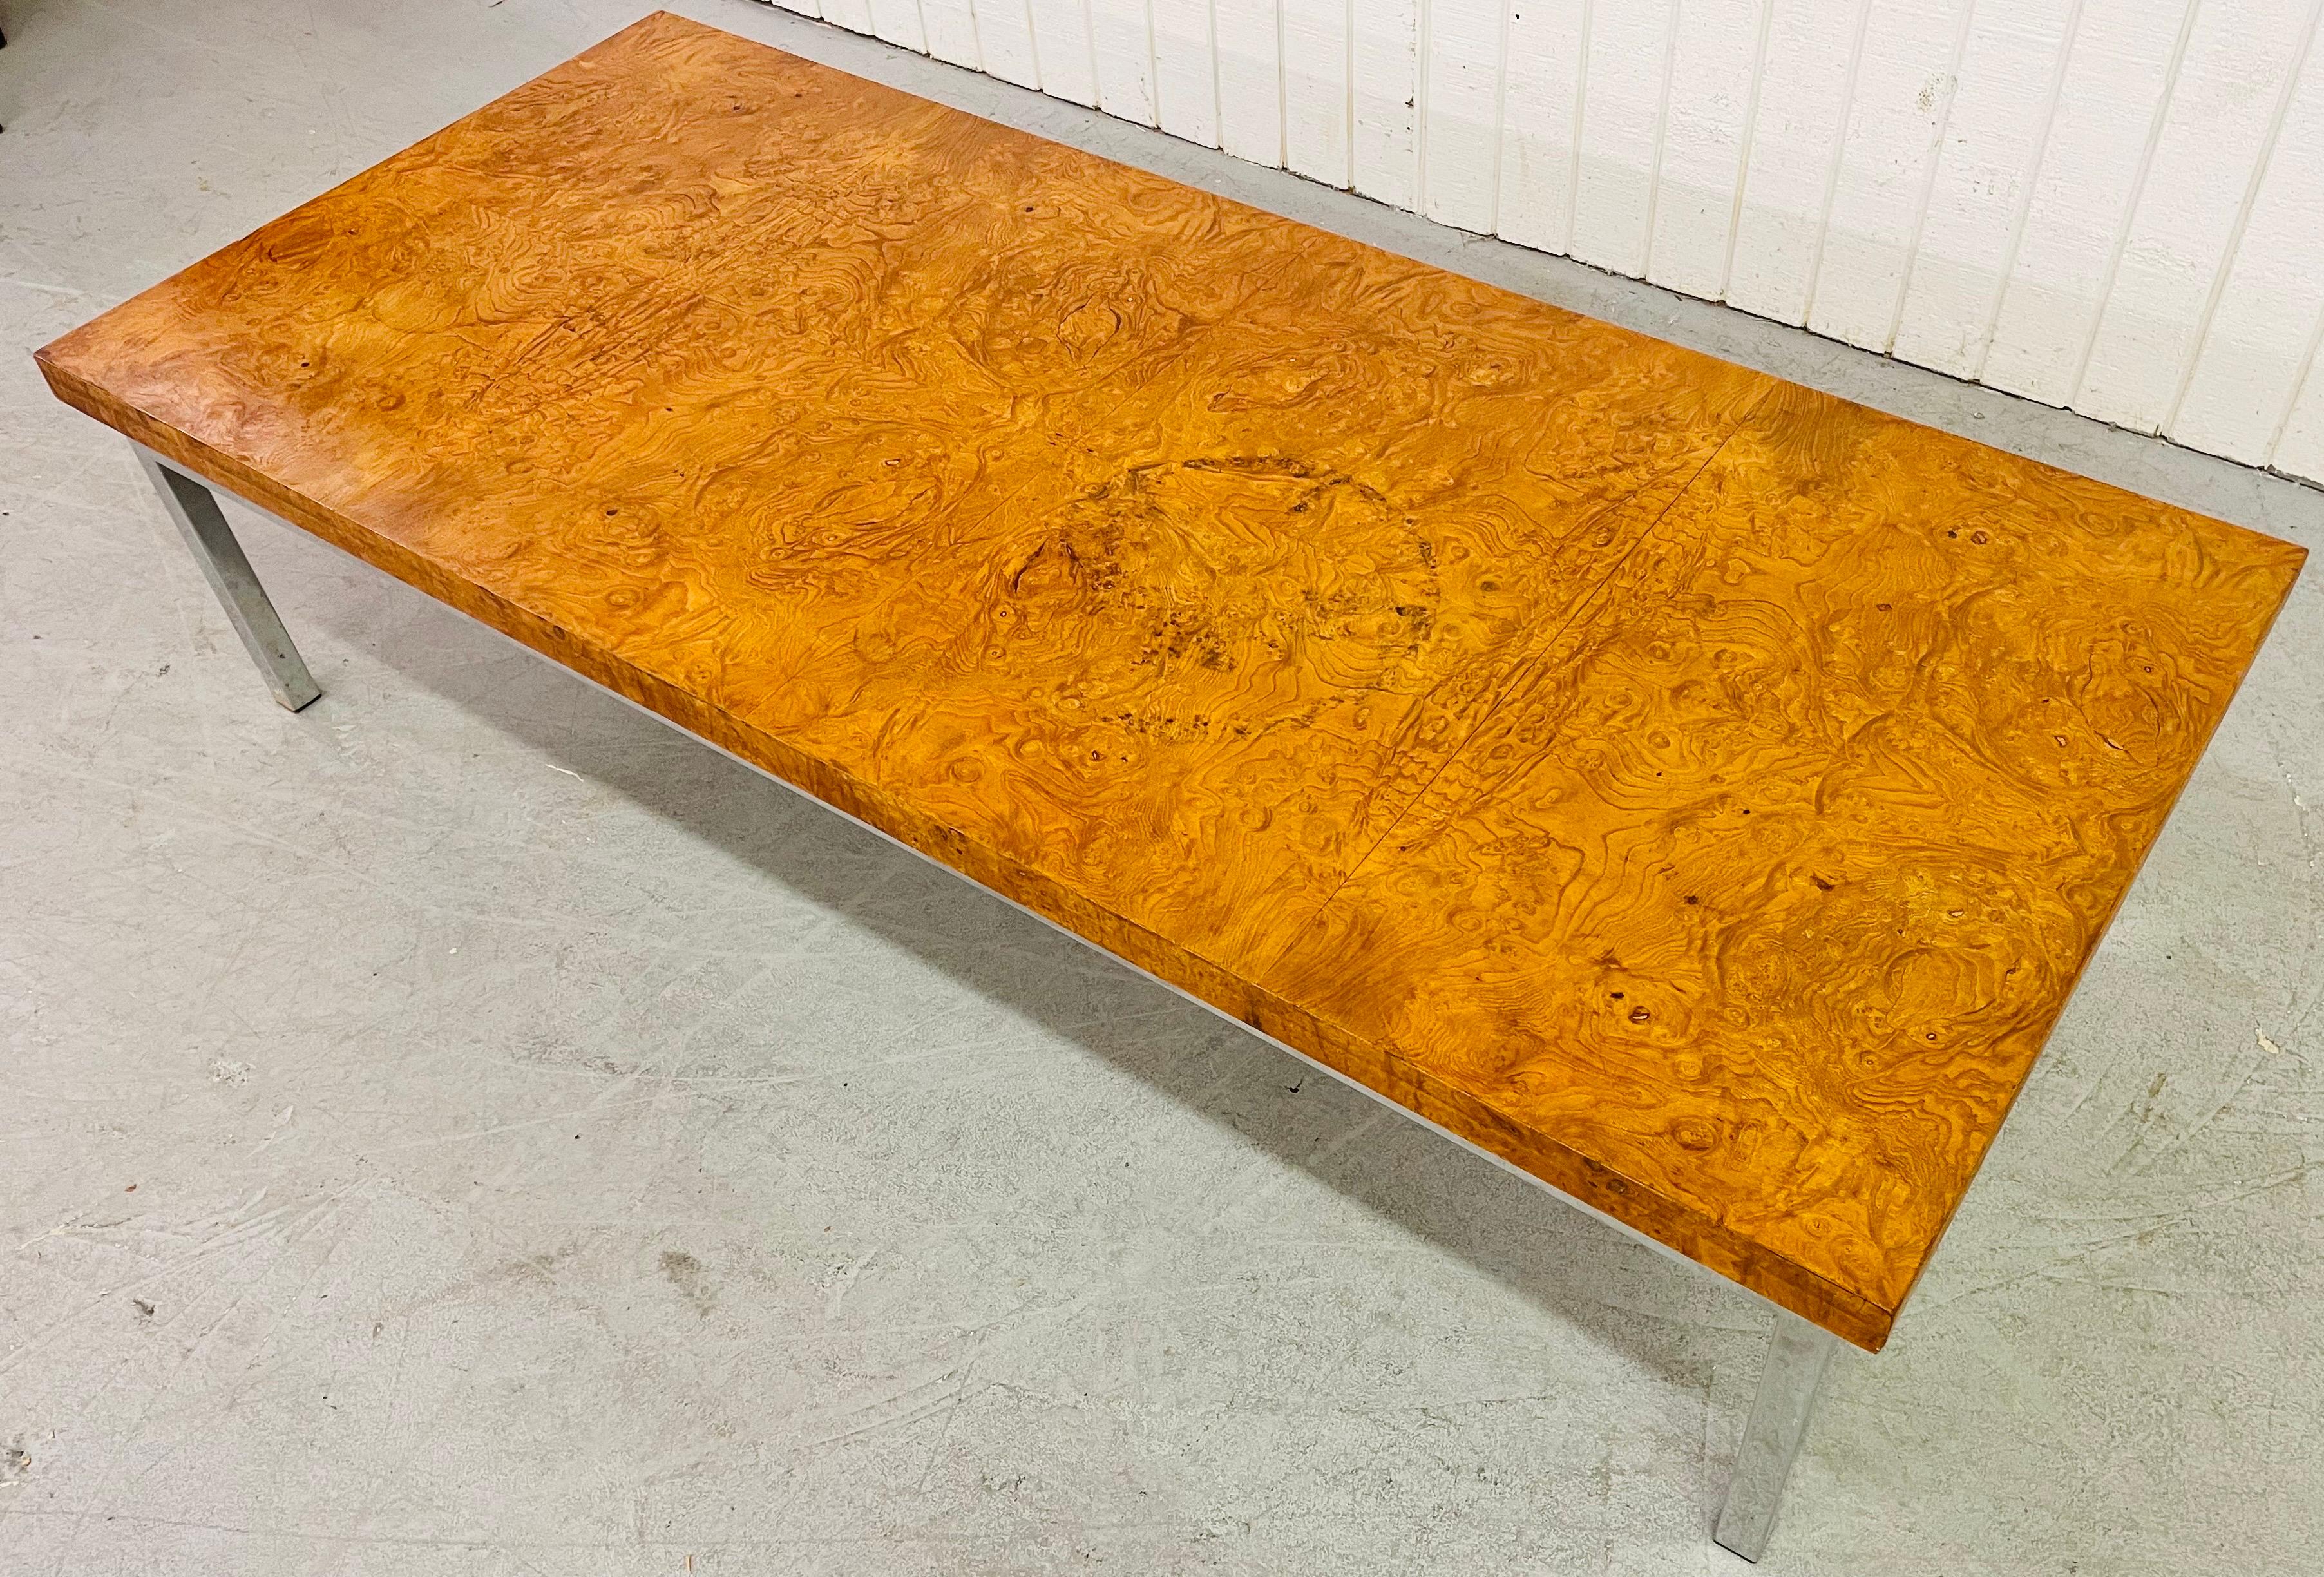 This listing is for a vintage Milo Baughman burled wood coffee table. Featuring a large rectangular burled wood top and an original flat bar chrome base.